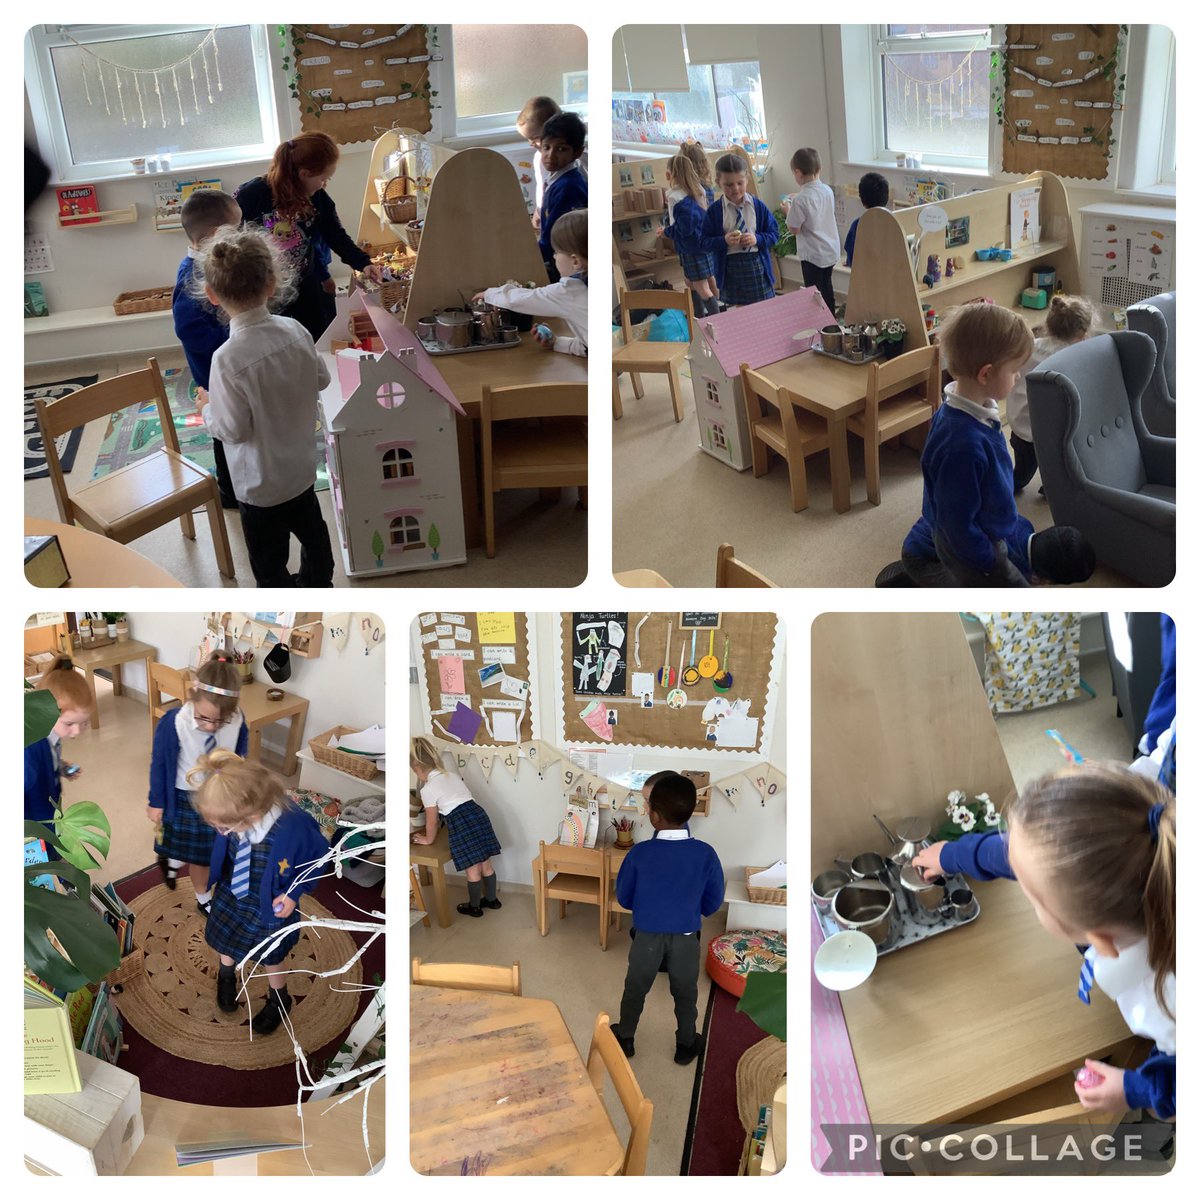 Reception had a surprise Easter egg hunt this morning 🐇🐰🐣🐥🥚